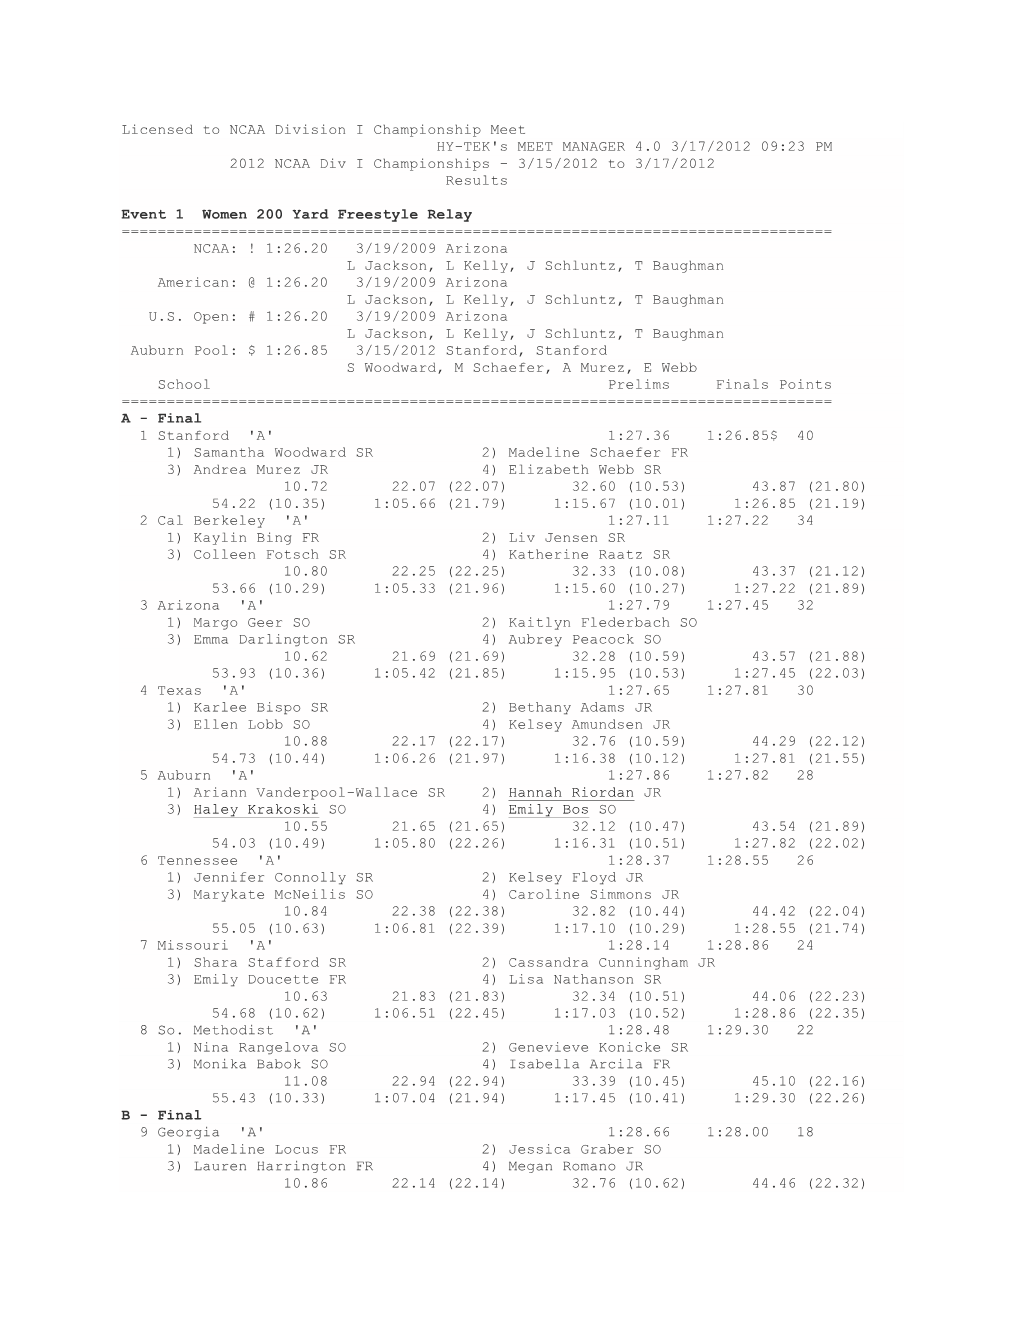 Licensed to NCAA Division I Championship Meet HY-TEK's MEET MANAGER 4.0 3/17/2012 09:23 PM 2012 NCAA Div I Championships - 3/15/2012 to 3/17/2012 Results